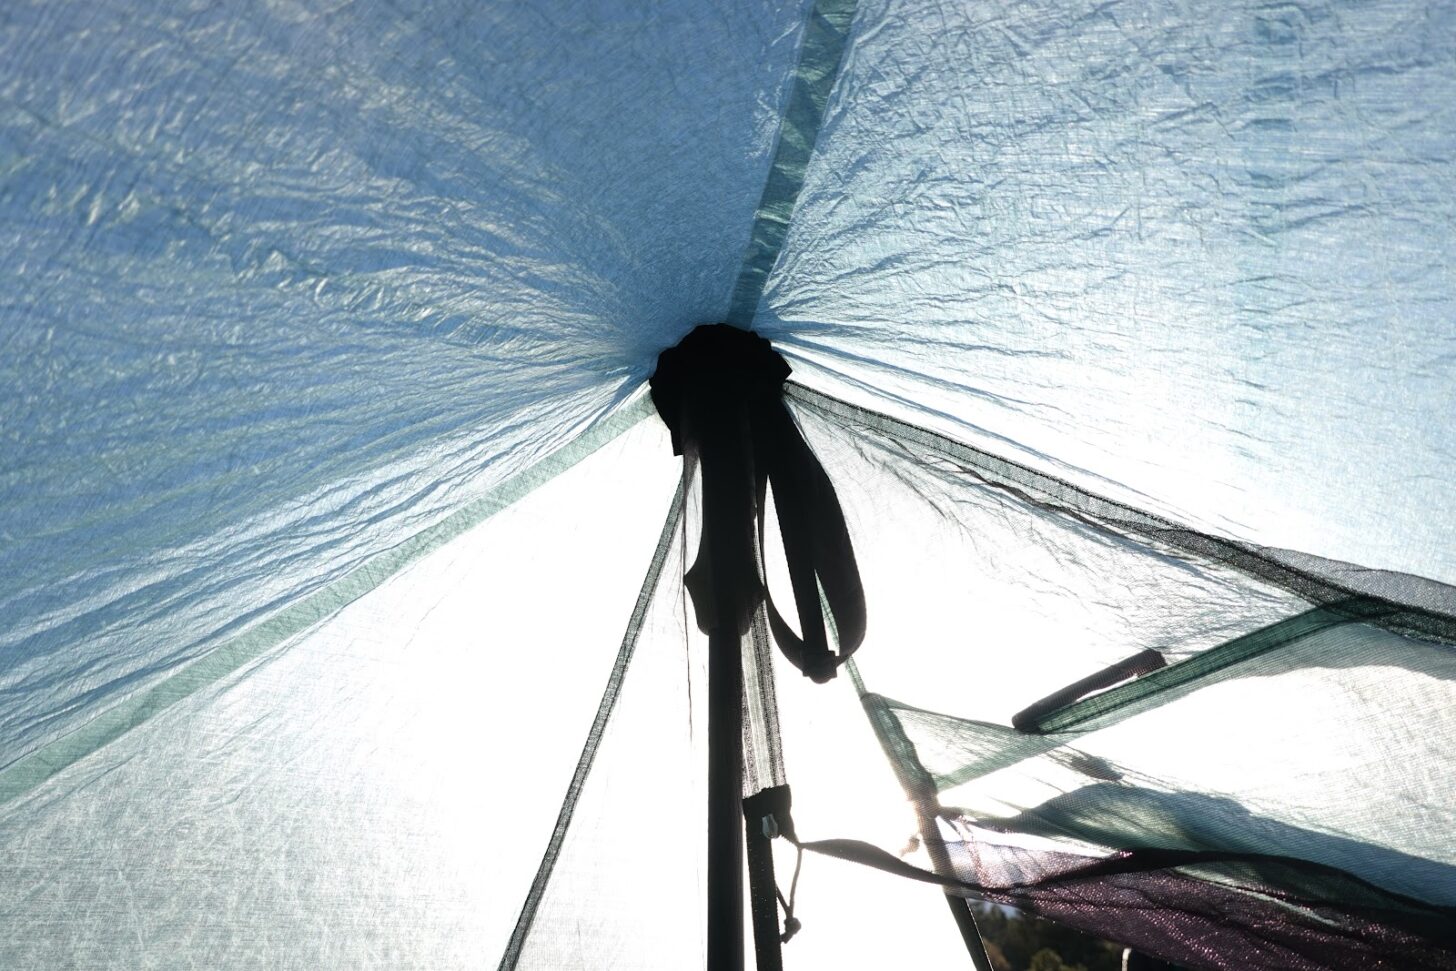 a close-up of a trekking pole handle pushing up against the apex of the tent